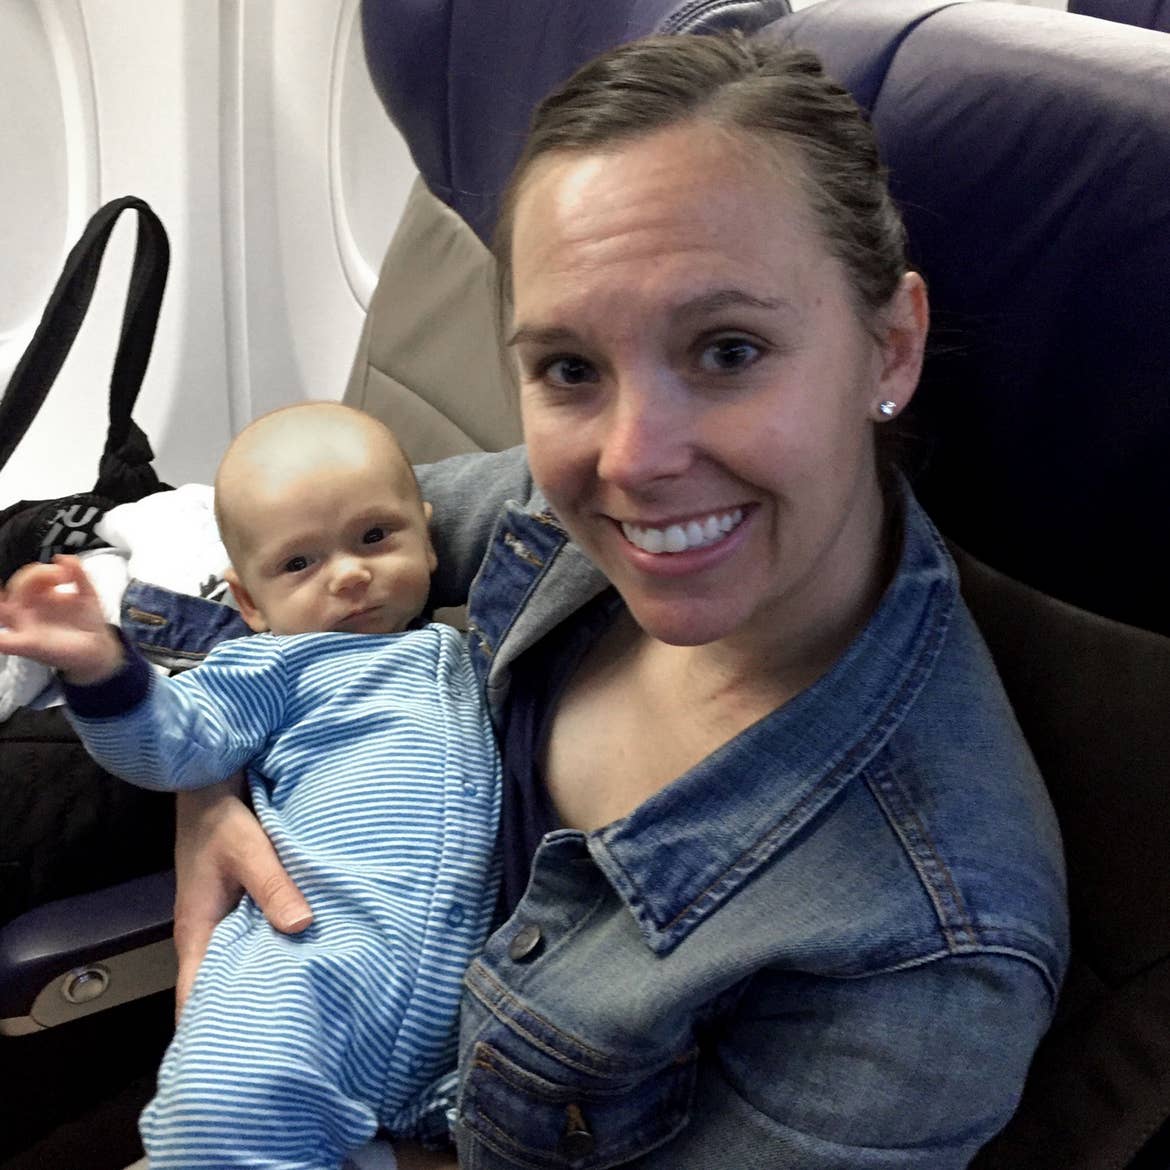 Author, Sarah Conroy, holds her son, Logan, as an infant near the window seat of the aircraft.